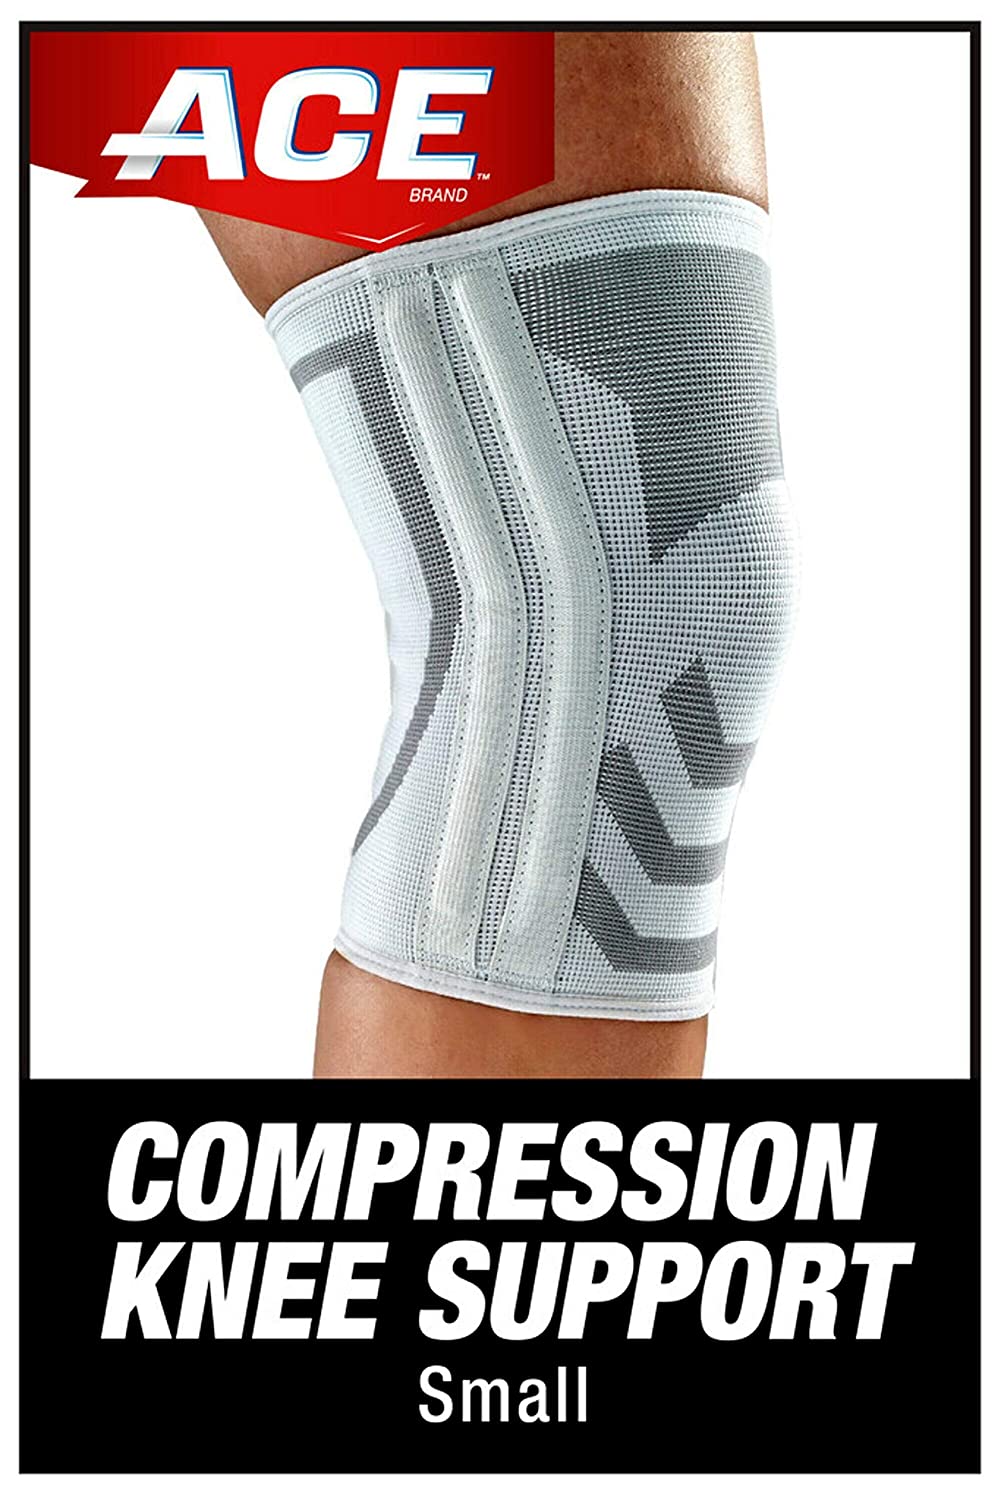 ACE Compression Knee Brace w/Side Stabilizers\ Support Injured Knee With Mild Compression\ Breathable Properties Let Sweat Escape\ Small\ White/Gray